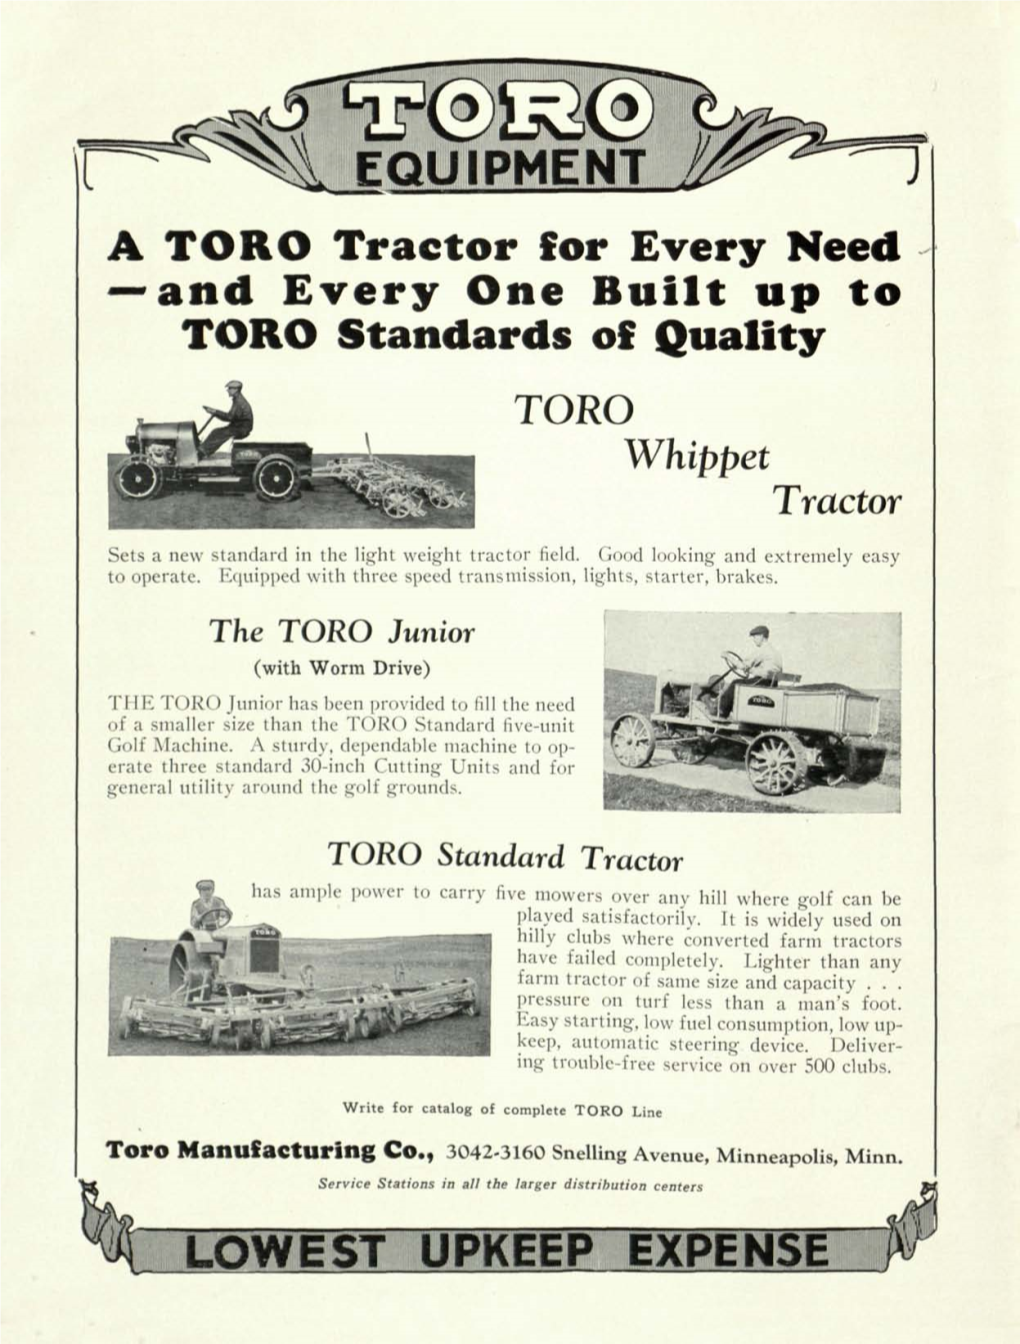 A TORO Tractor for Every Need — and Every One Built up to TORO Standards of Quality TORO Whippet Tractor Sets a New Standard in the Light Weight Tractor Field